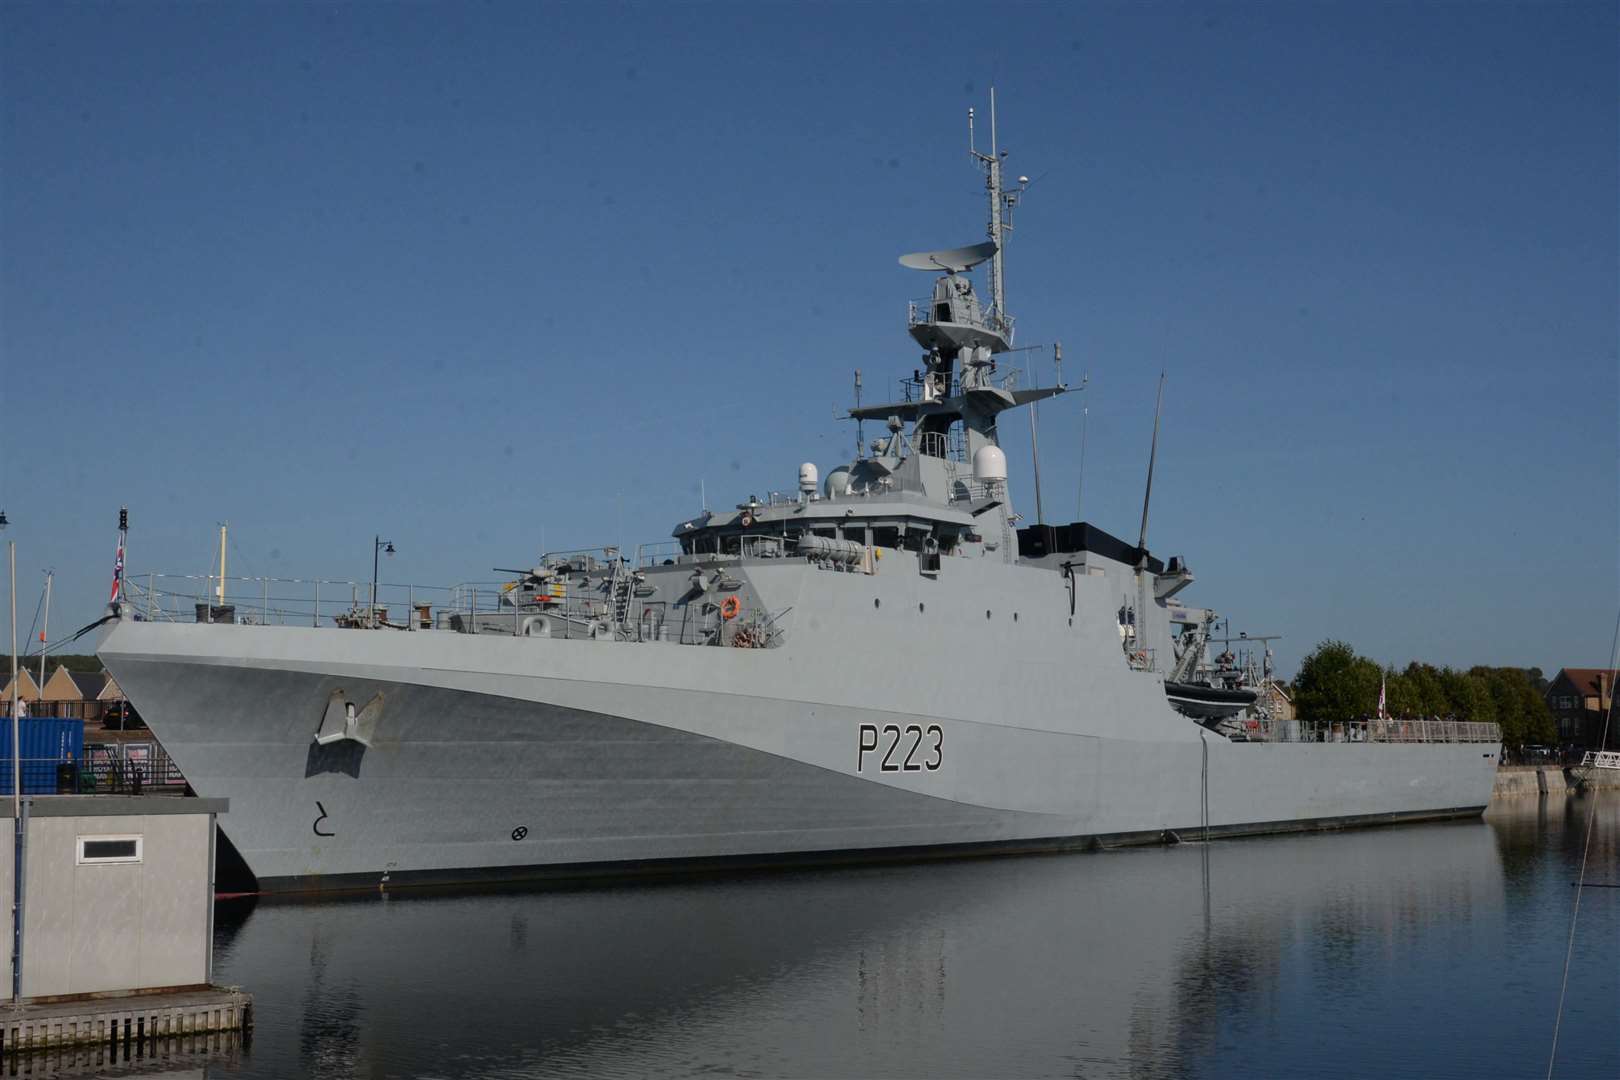 HMS Medway docked at her berth in Chatham after the ceremony